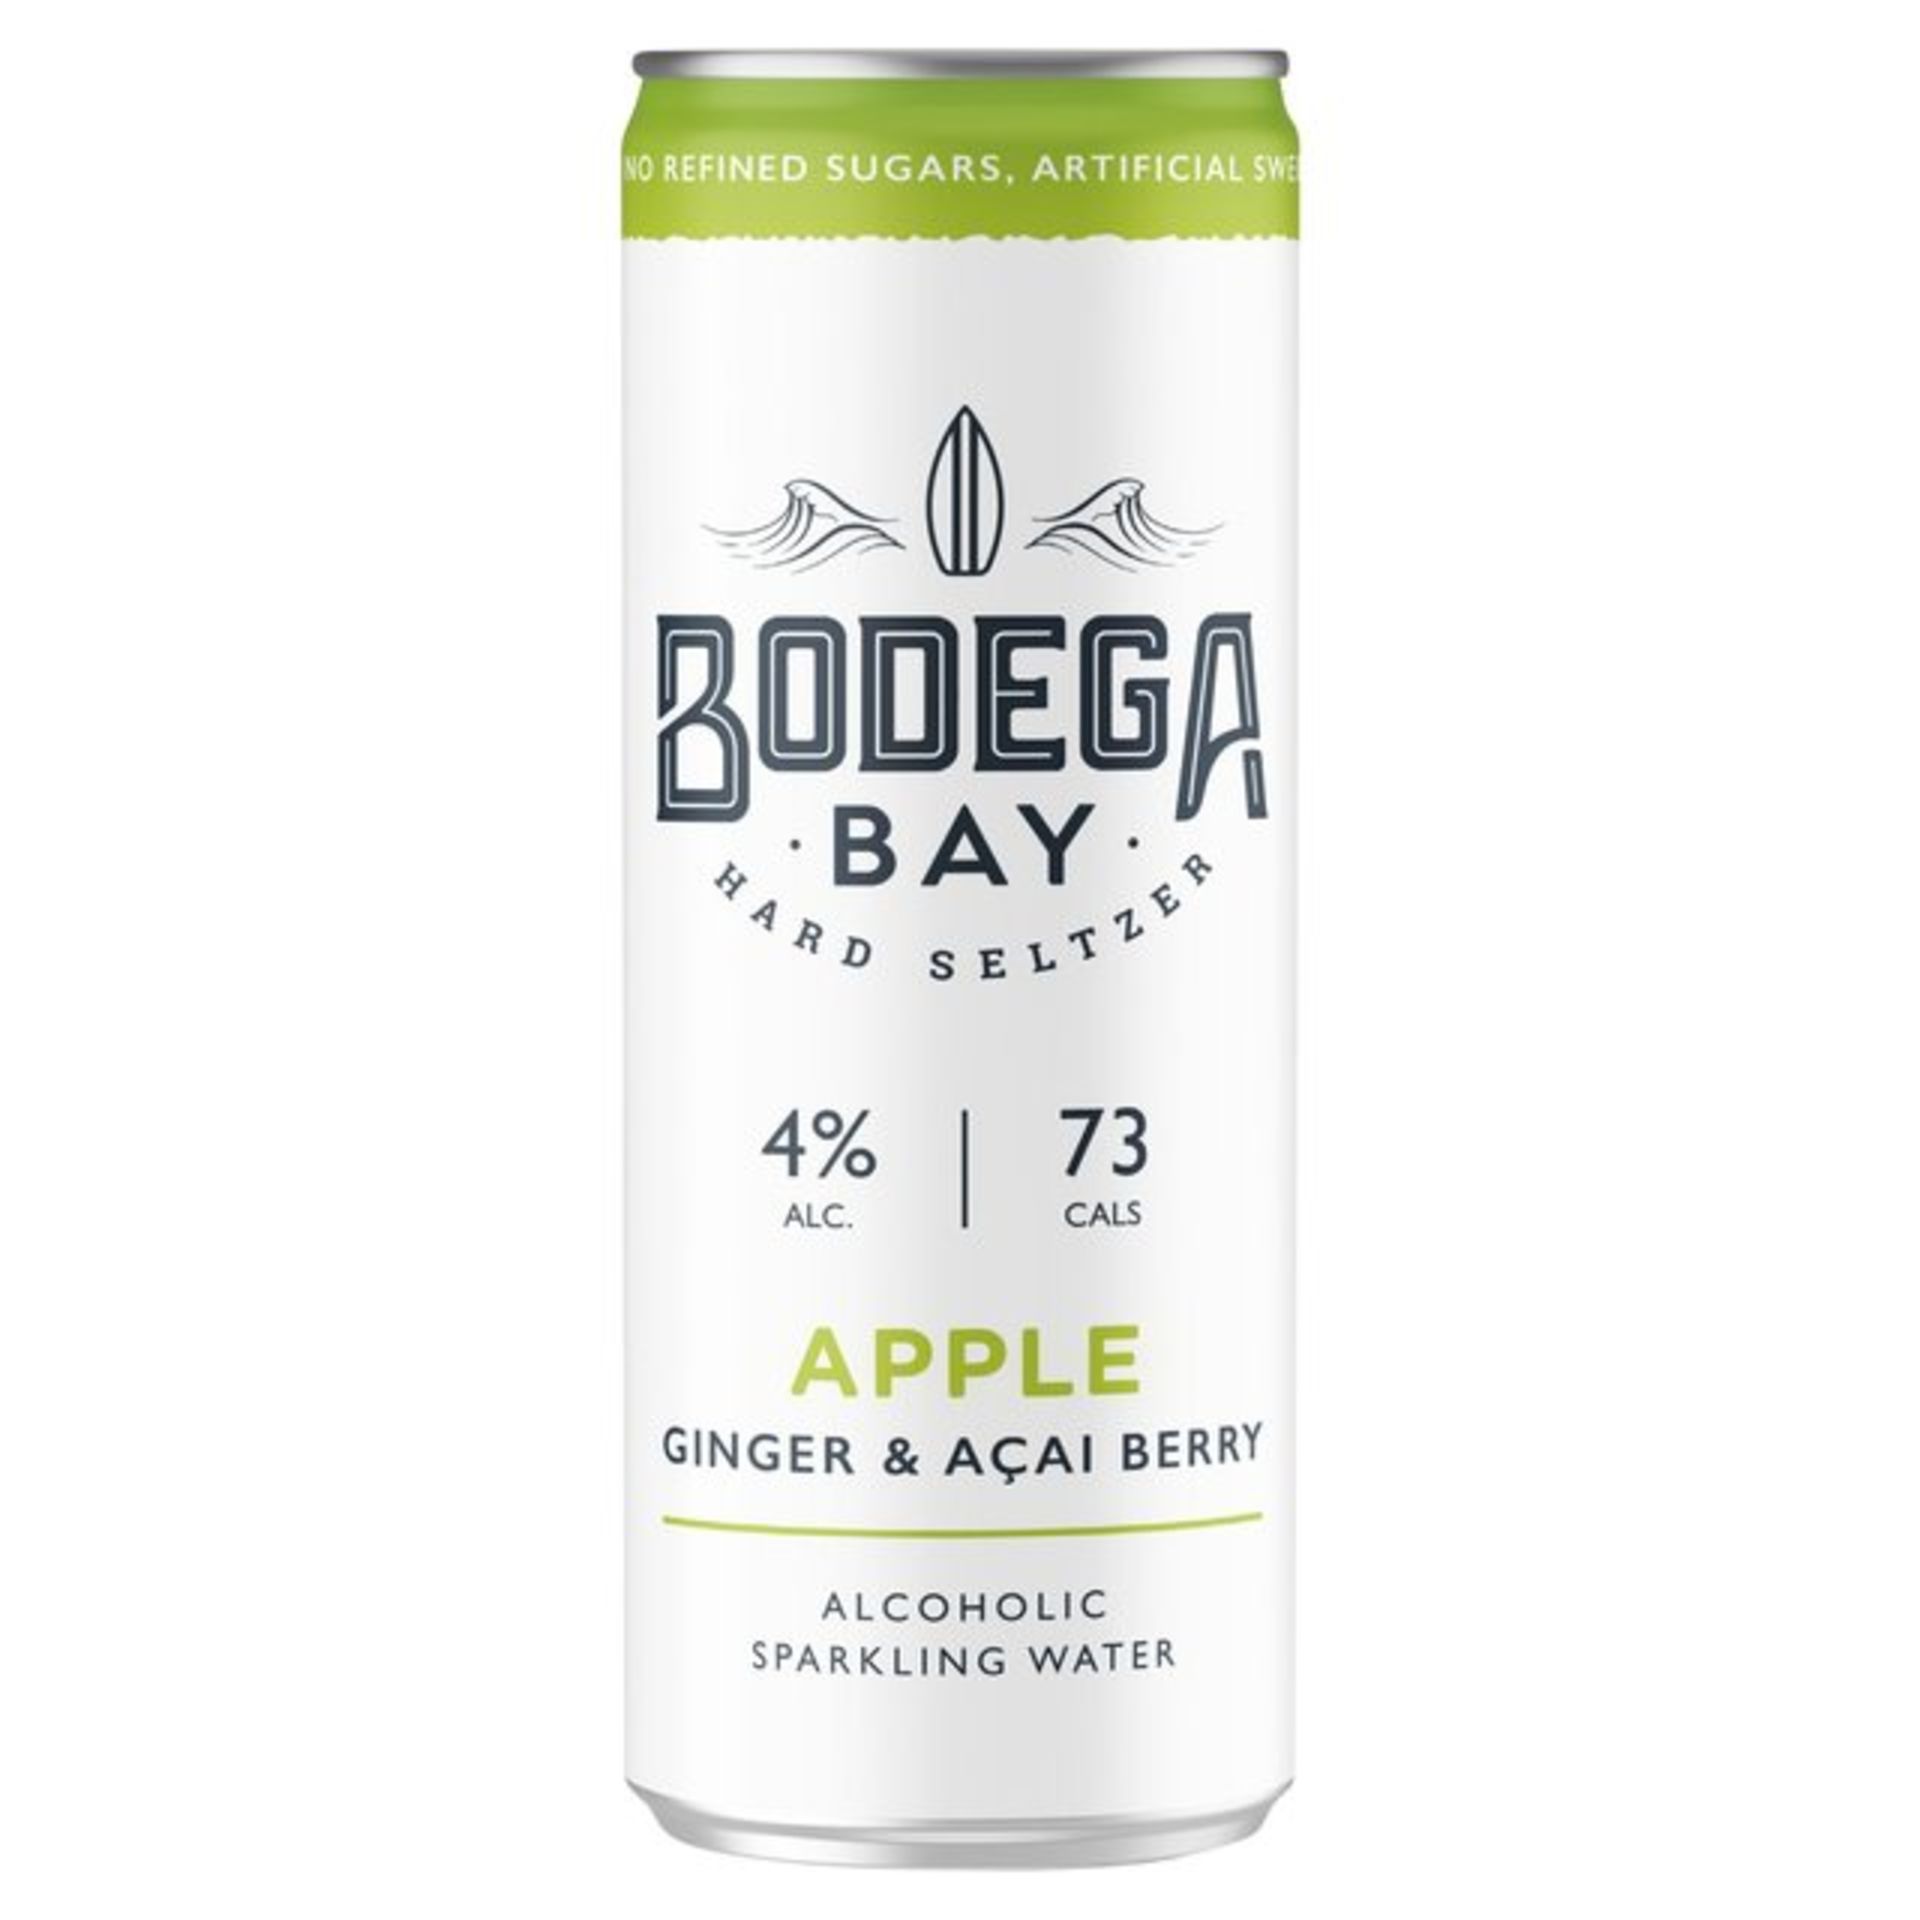 360 x Cans of Bodega Bay Hard Seltzer 250ml Alcoholic Sparkling Water Drinks - Various Flavours - Image 2 of 20